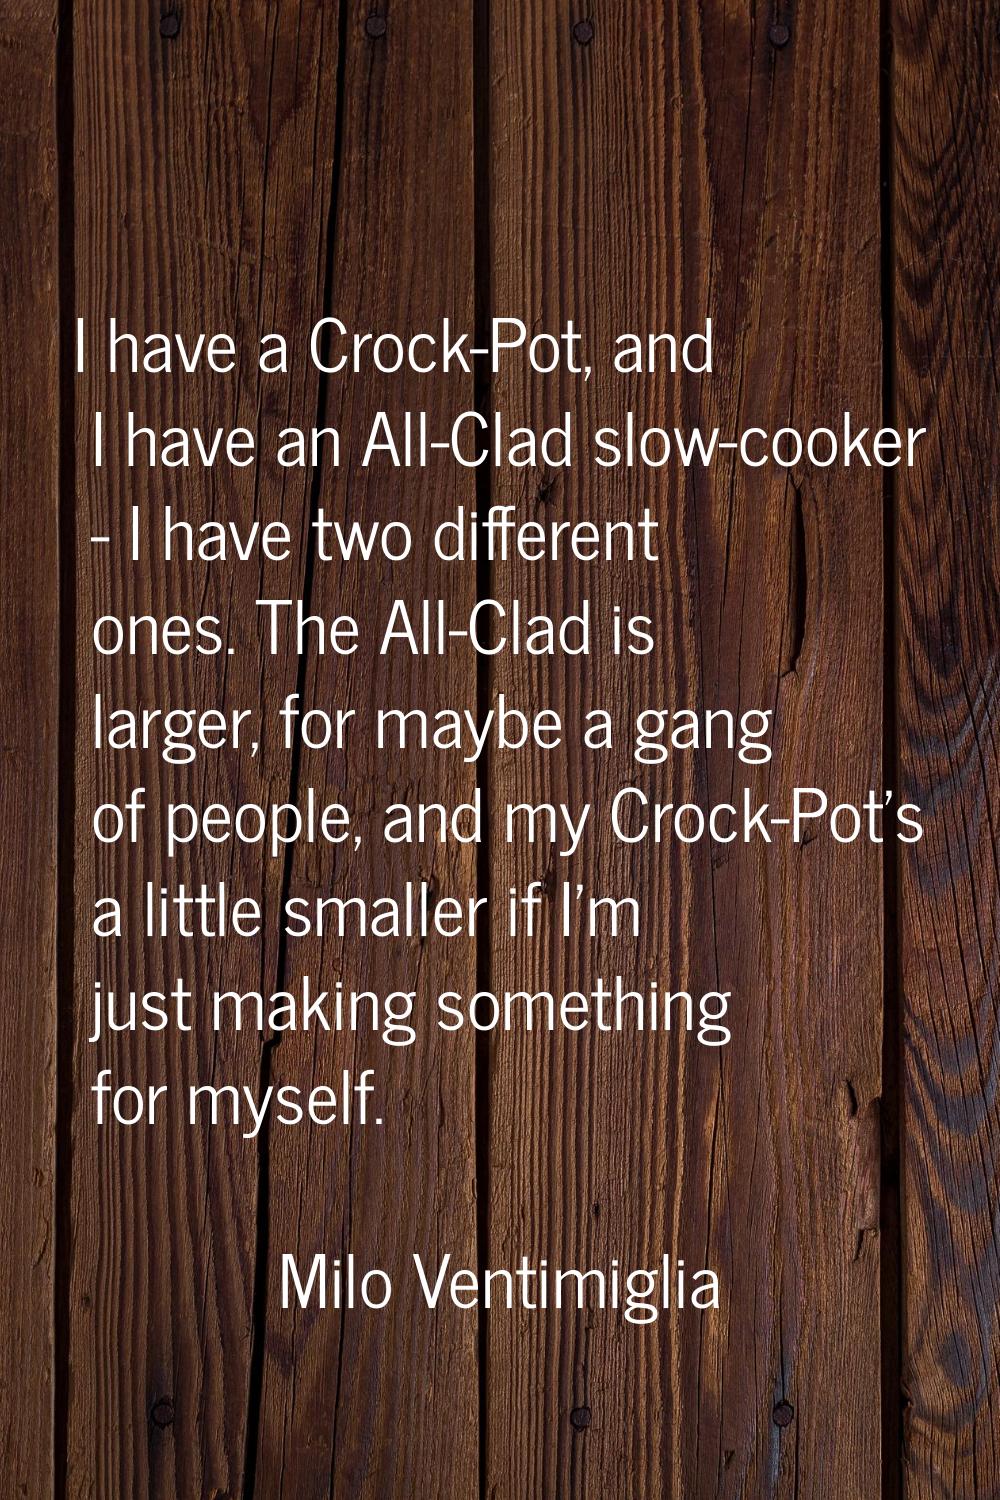 I have a Crock-Pot, and I have an All-Clad slow-cooker - I have two different ones. The All-Clad is